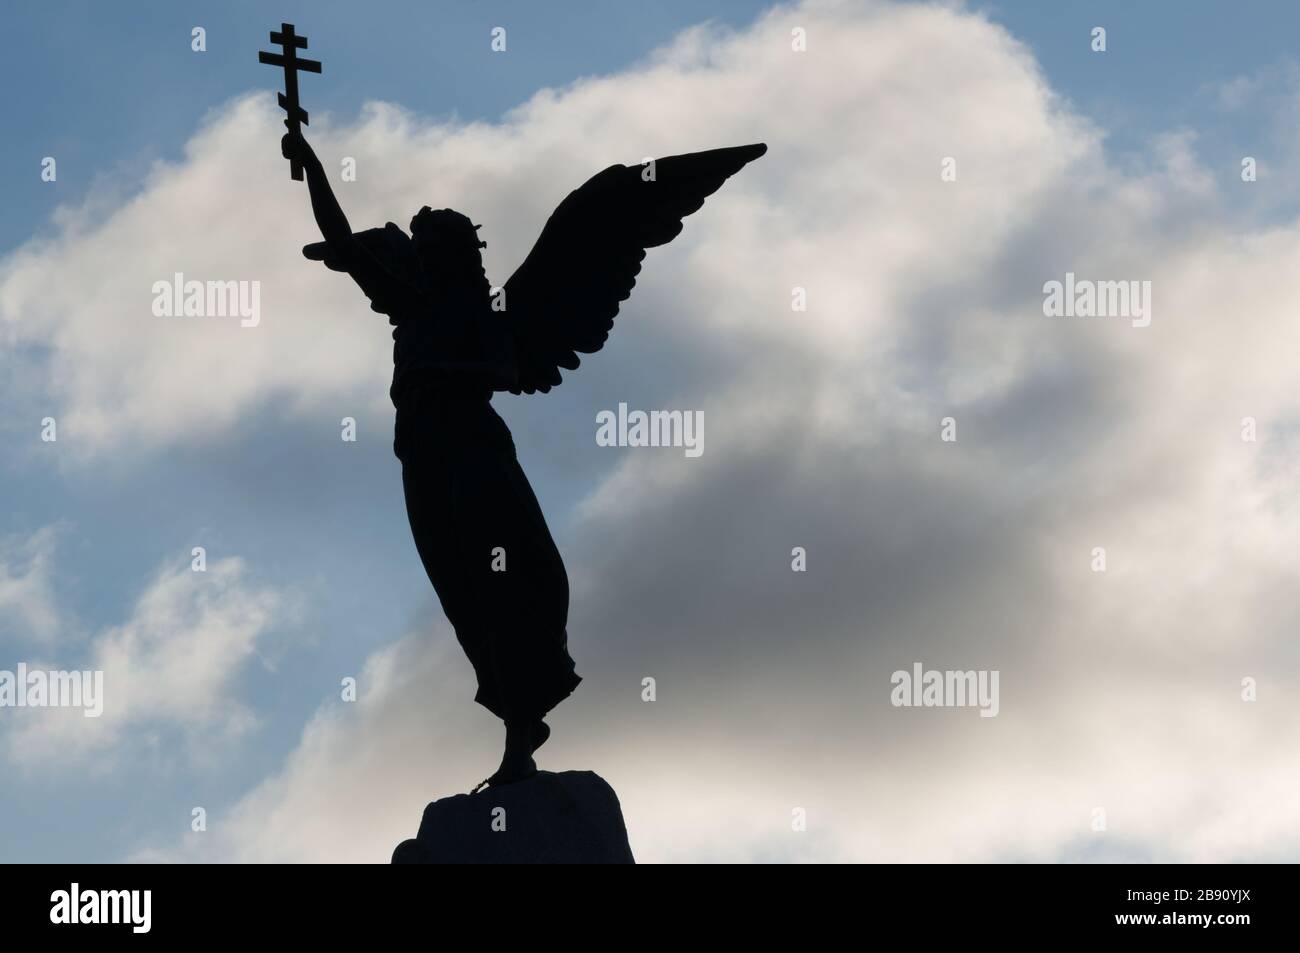 Tallinn, Estonia - 01.05.2020: Silhouette of an angel with a cross in his hand on a background of dramatic sky and sun. Stock Photo